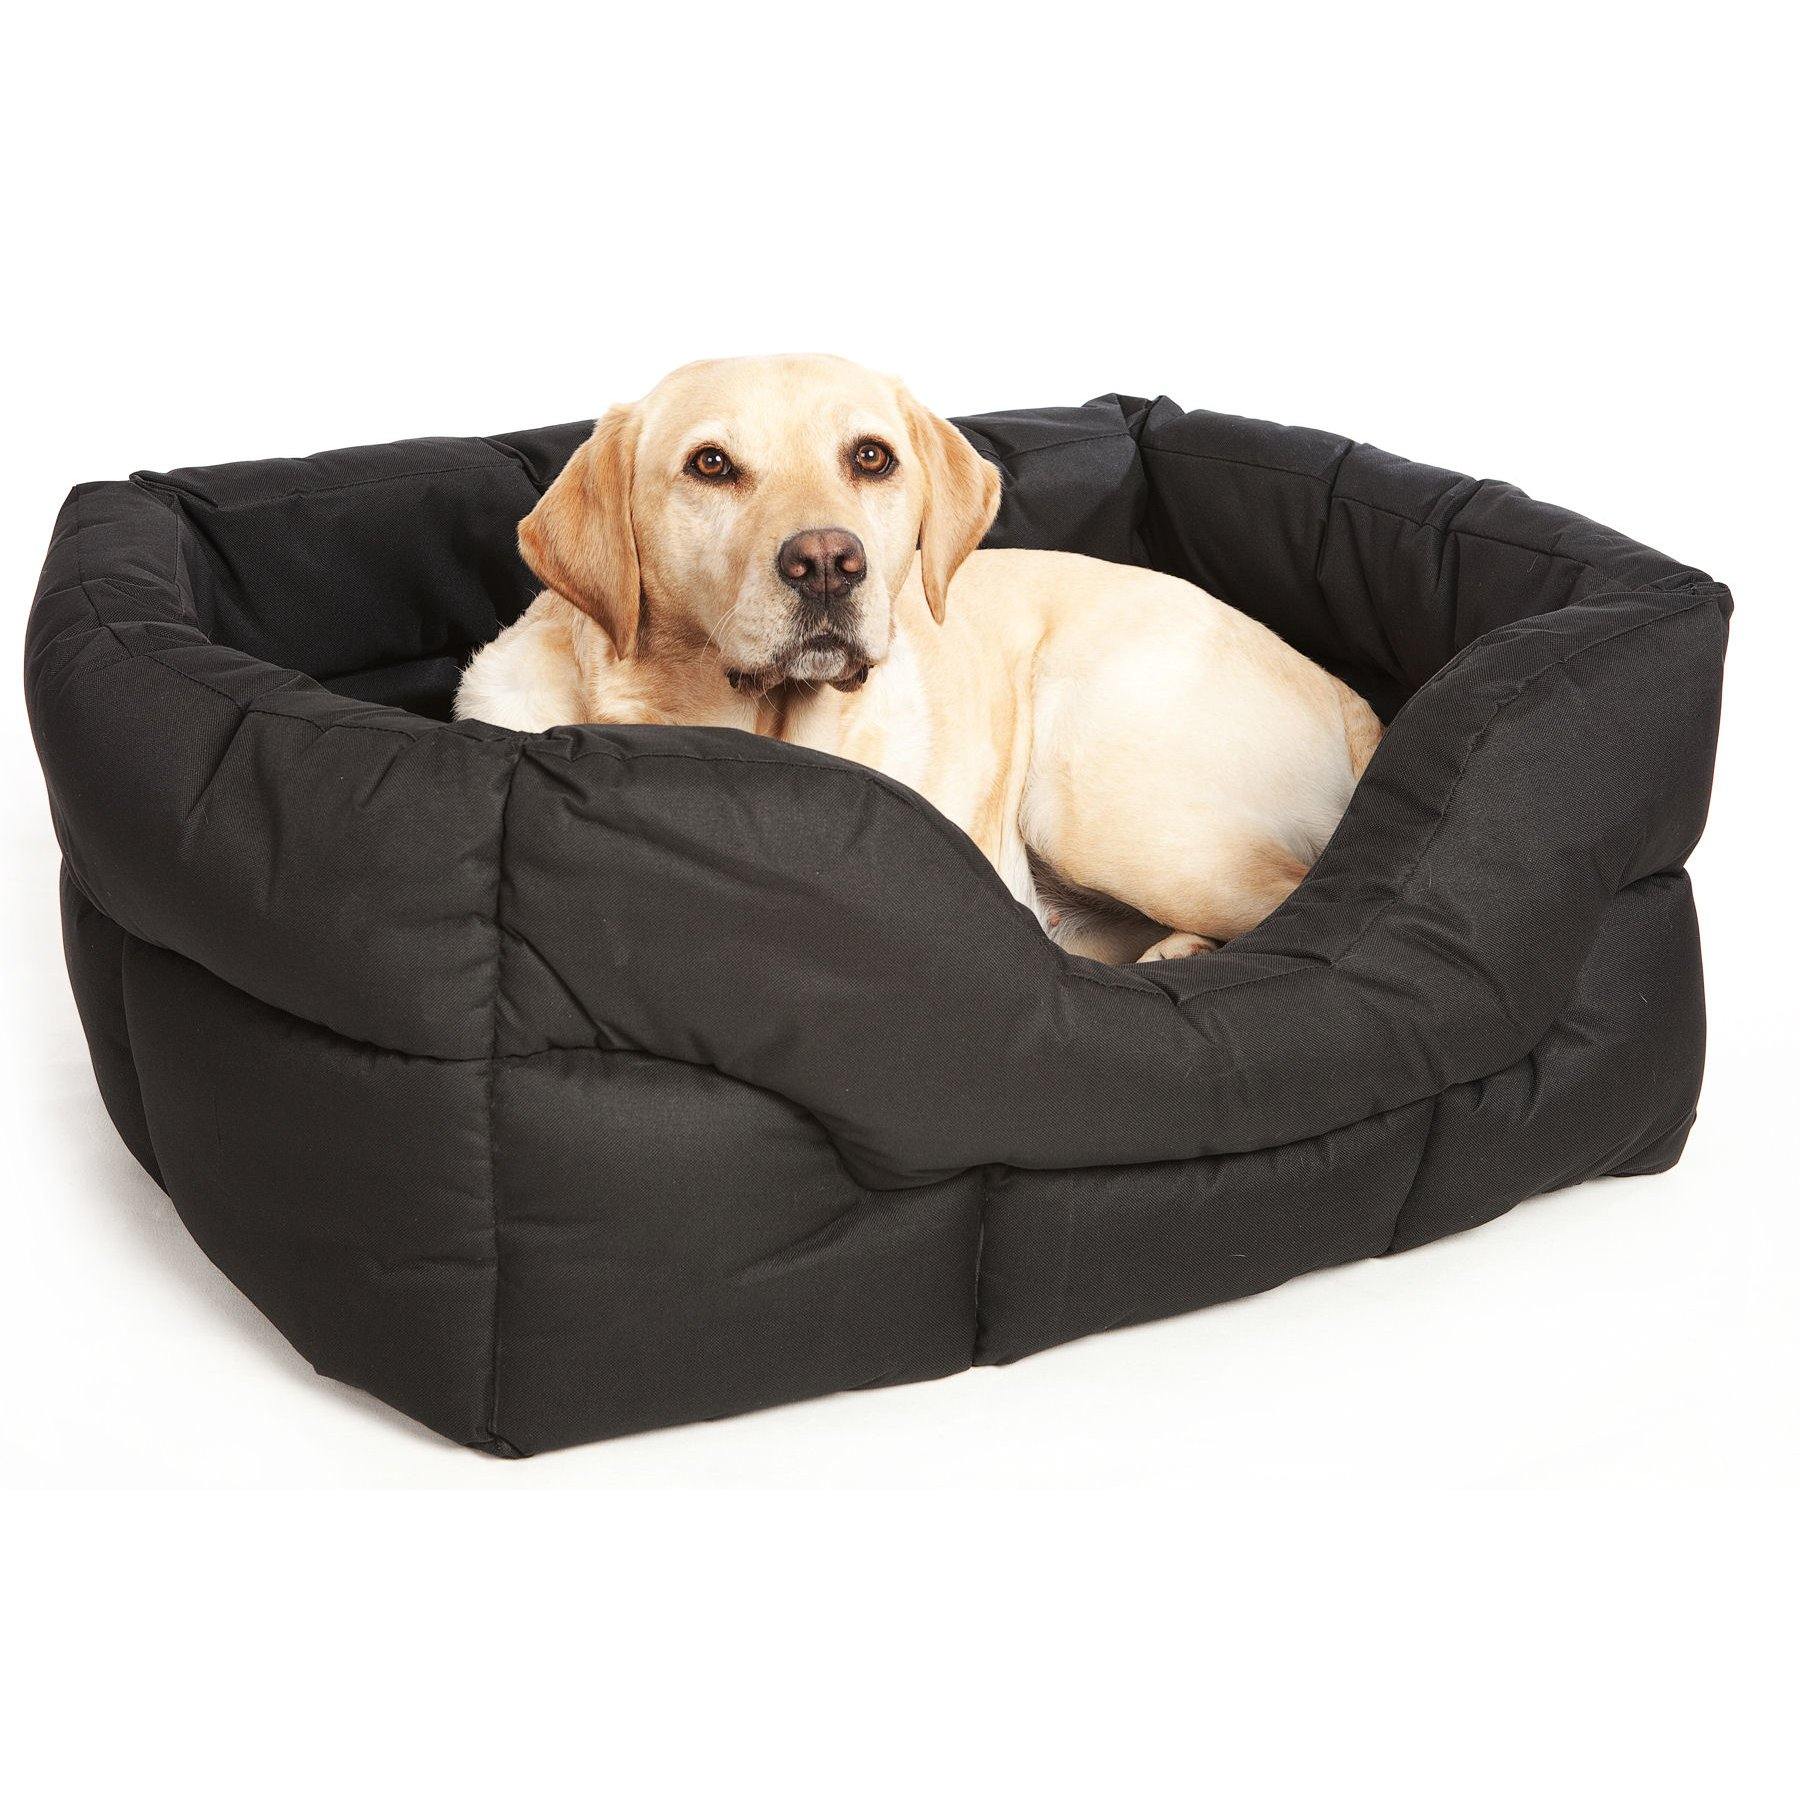 P&L Heavy Duty Rectangular Waterproof Dog Bed - Dog Bed Outlet